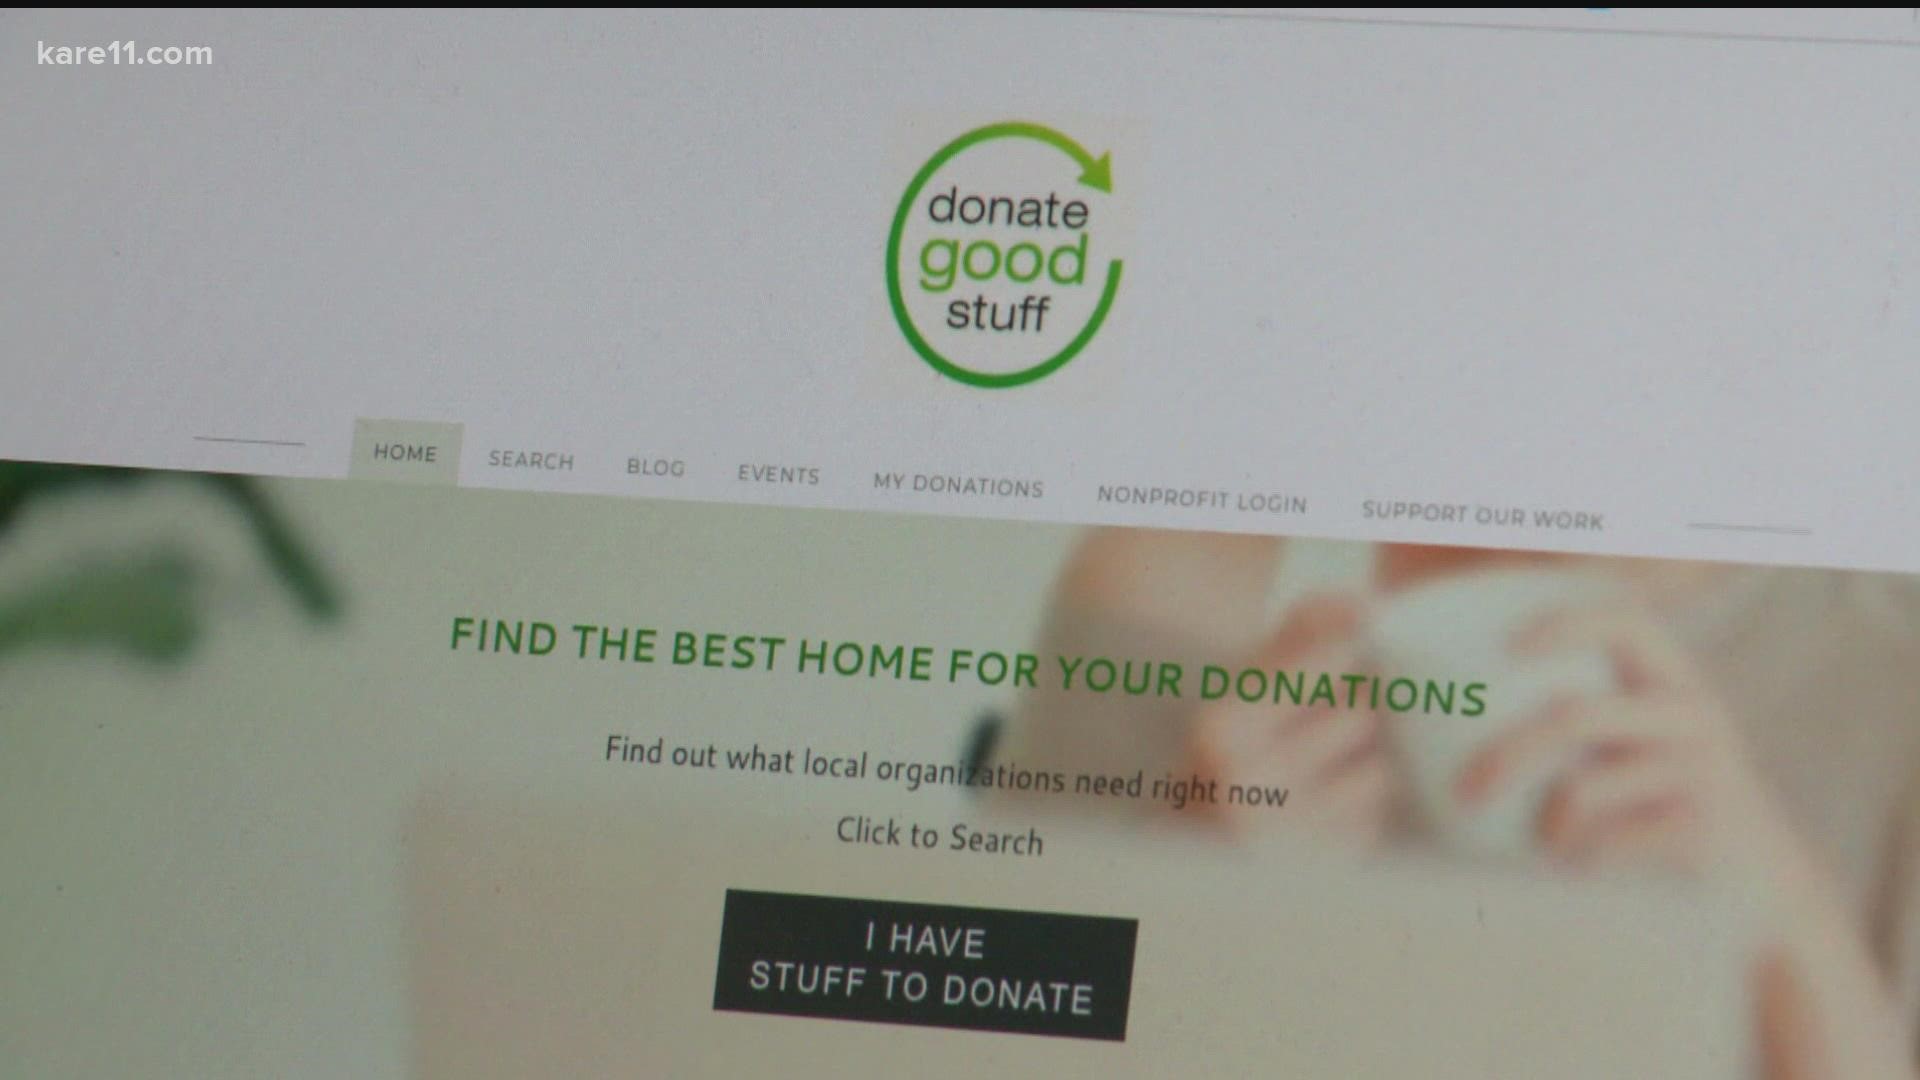 A St. Paul-based organization is making it easy for people to declutter while also doing good in their communities.